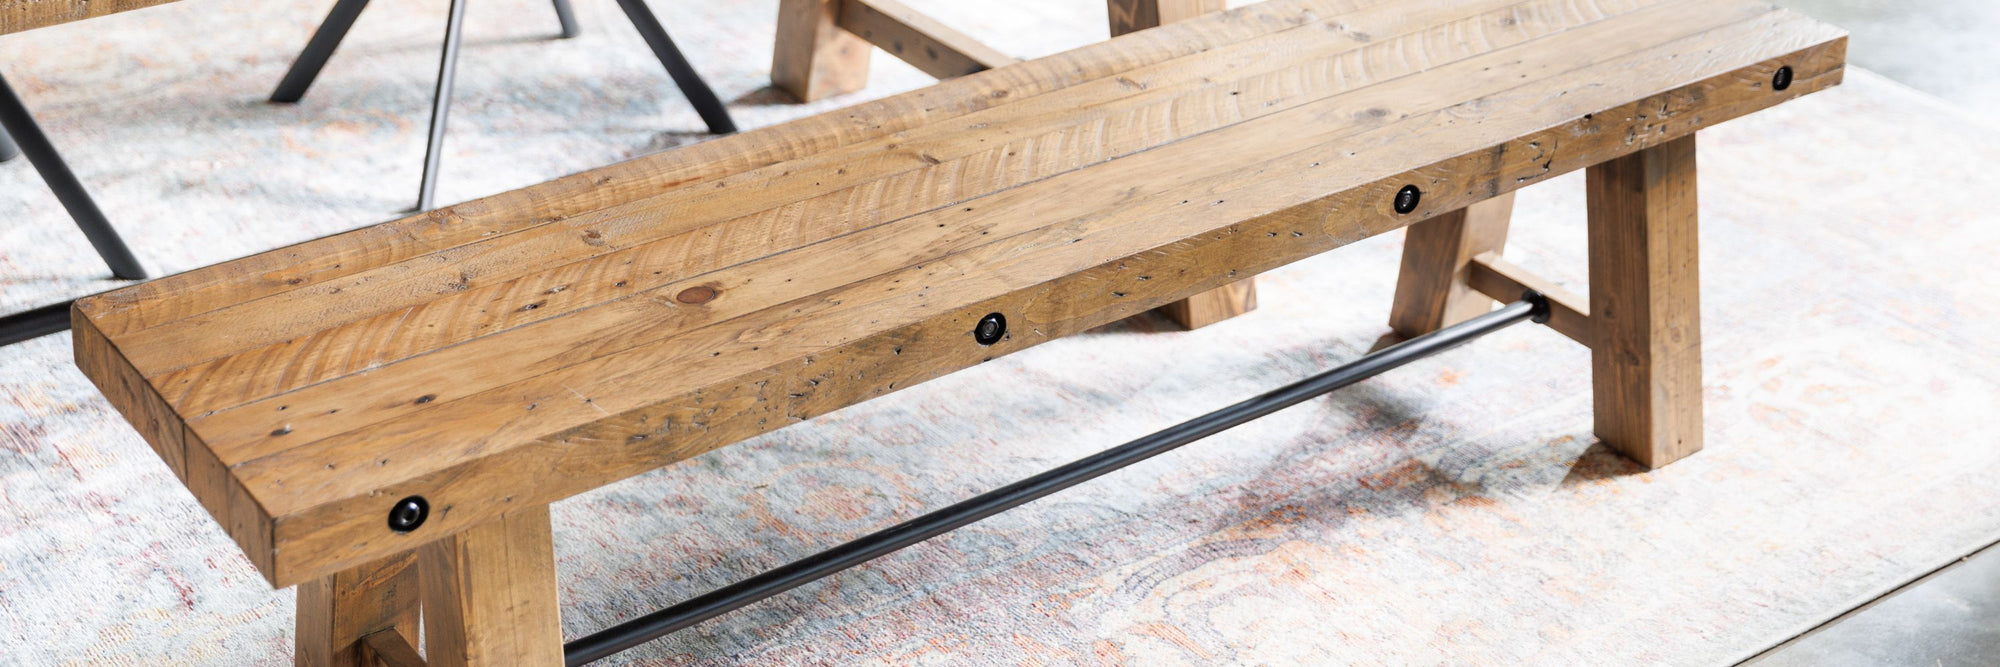 Reclaimed Benches